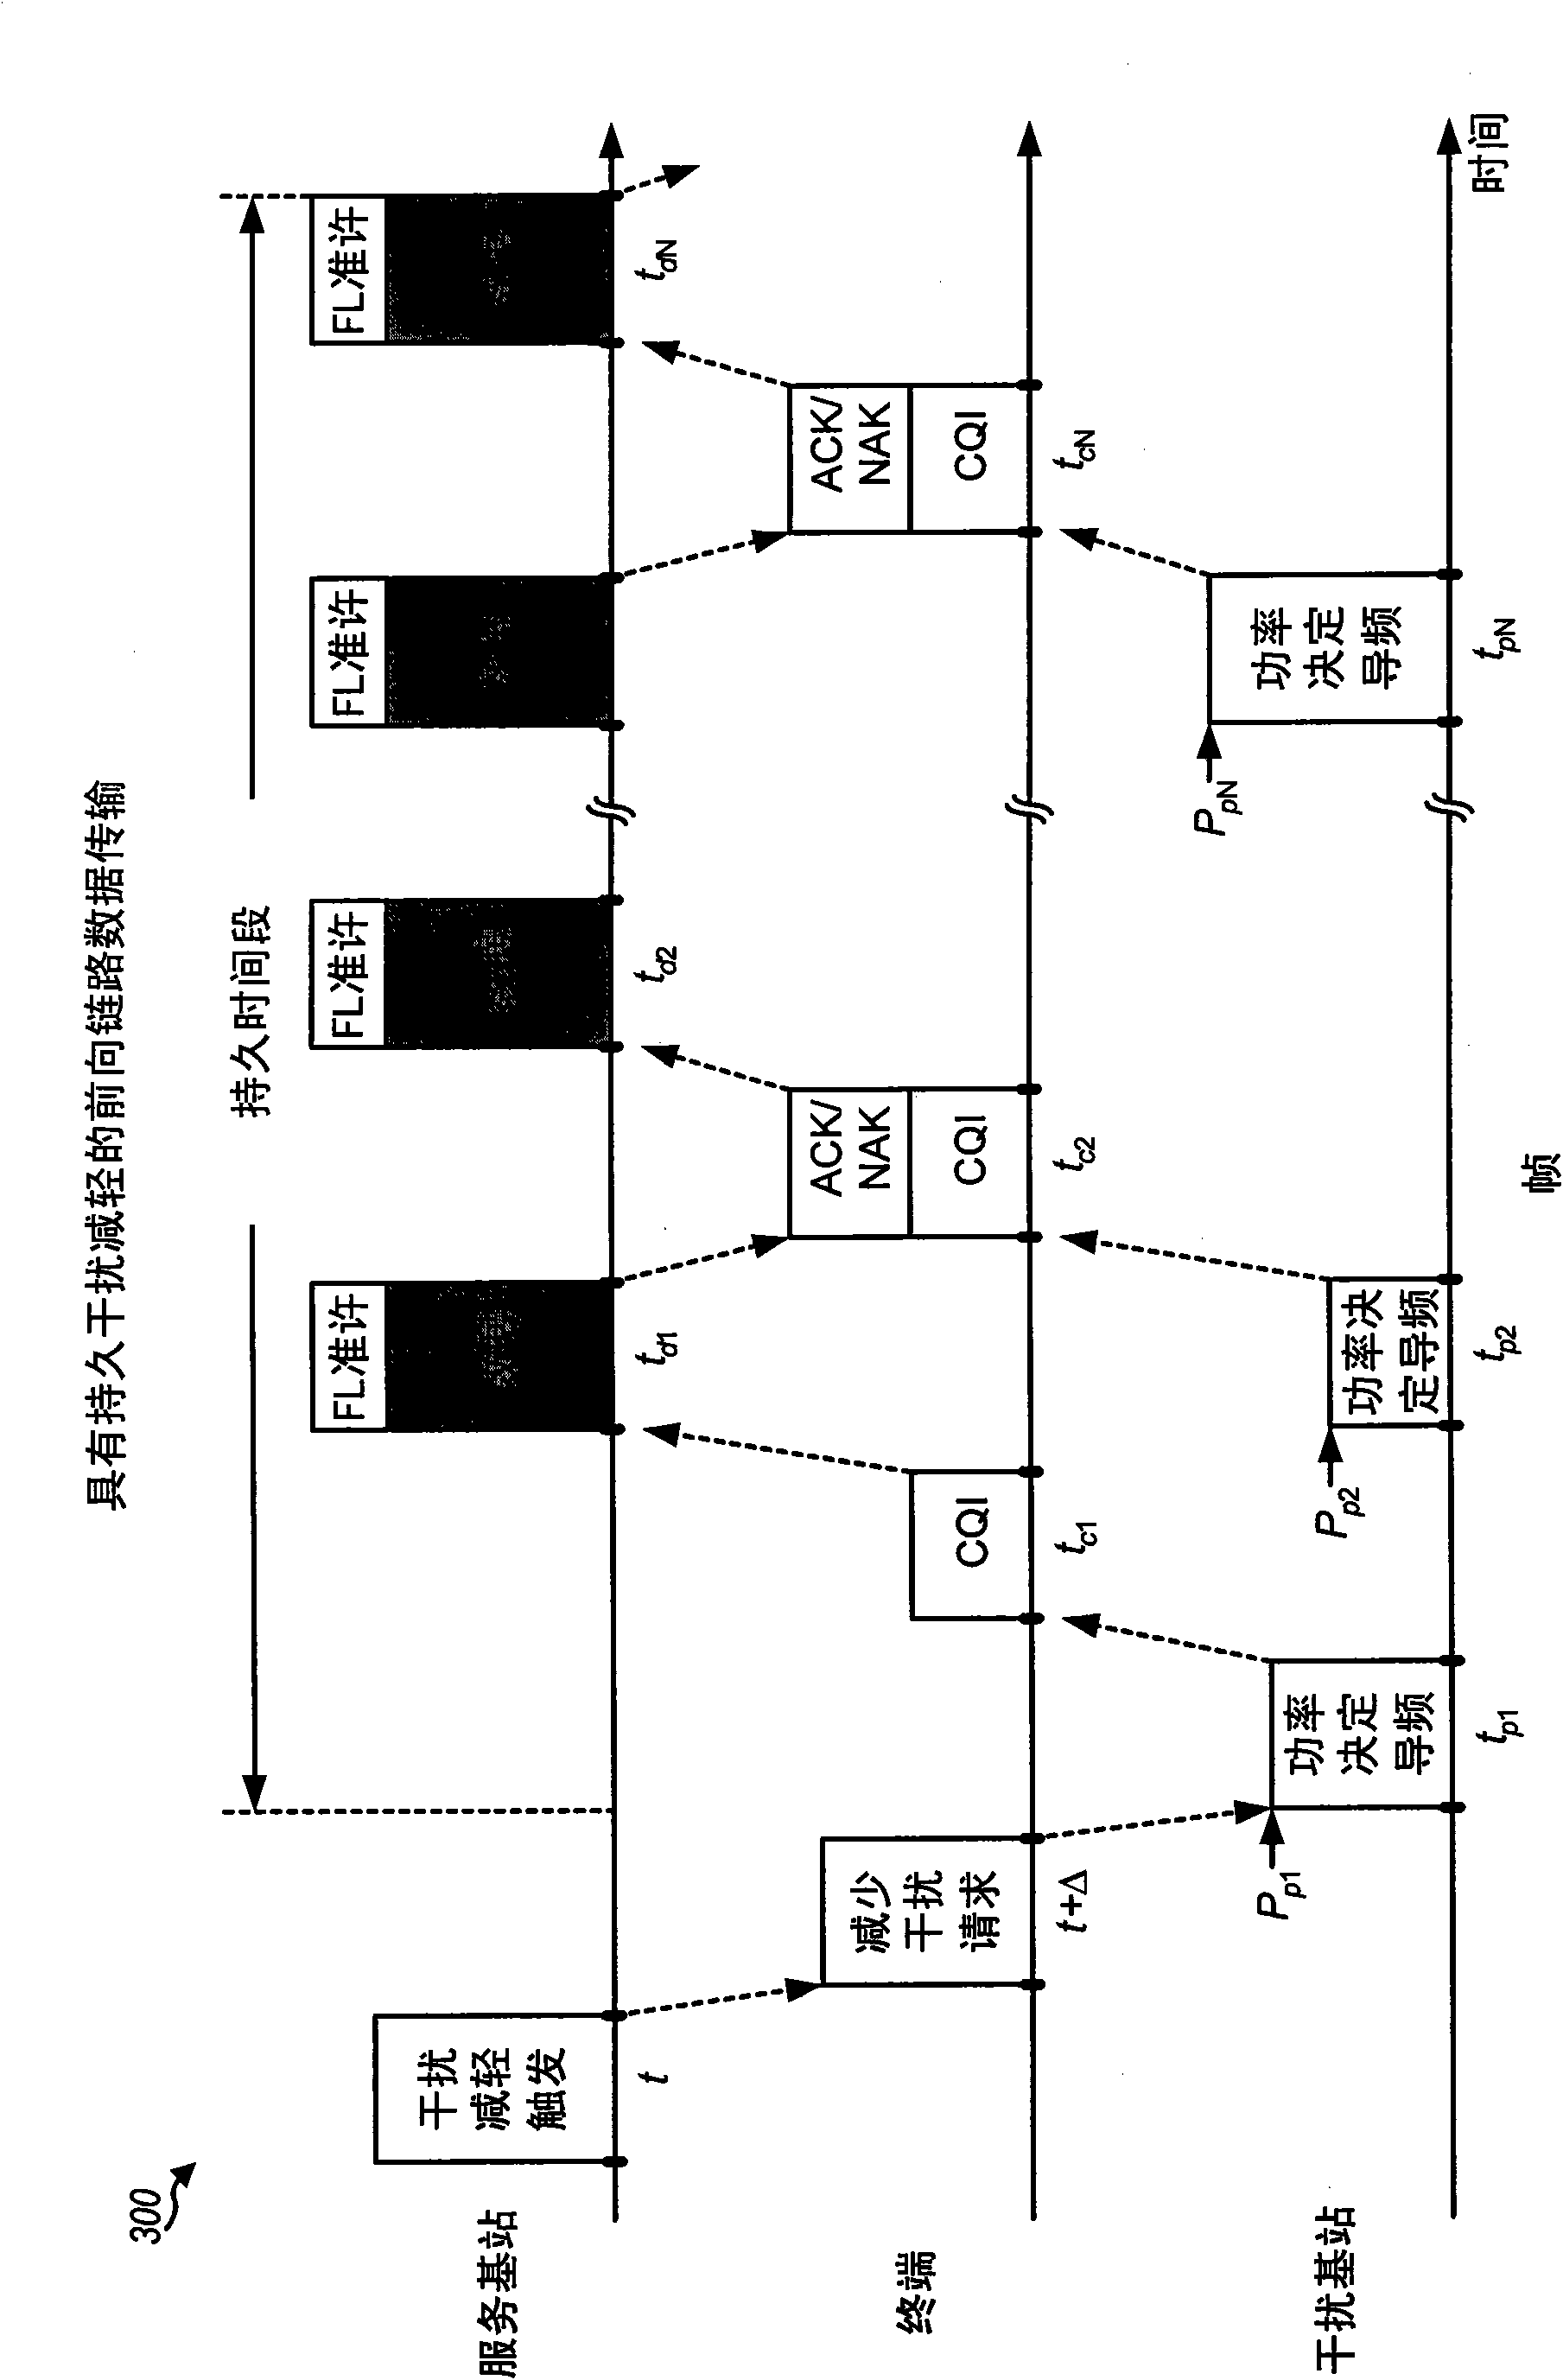 Persistent interference mitigation in a wireless communication system